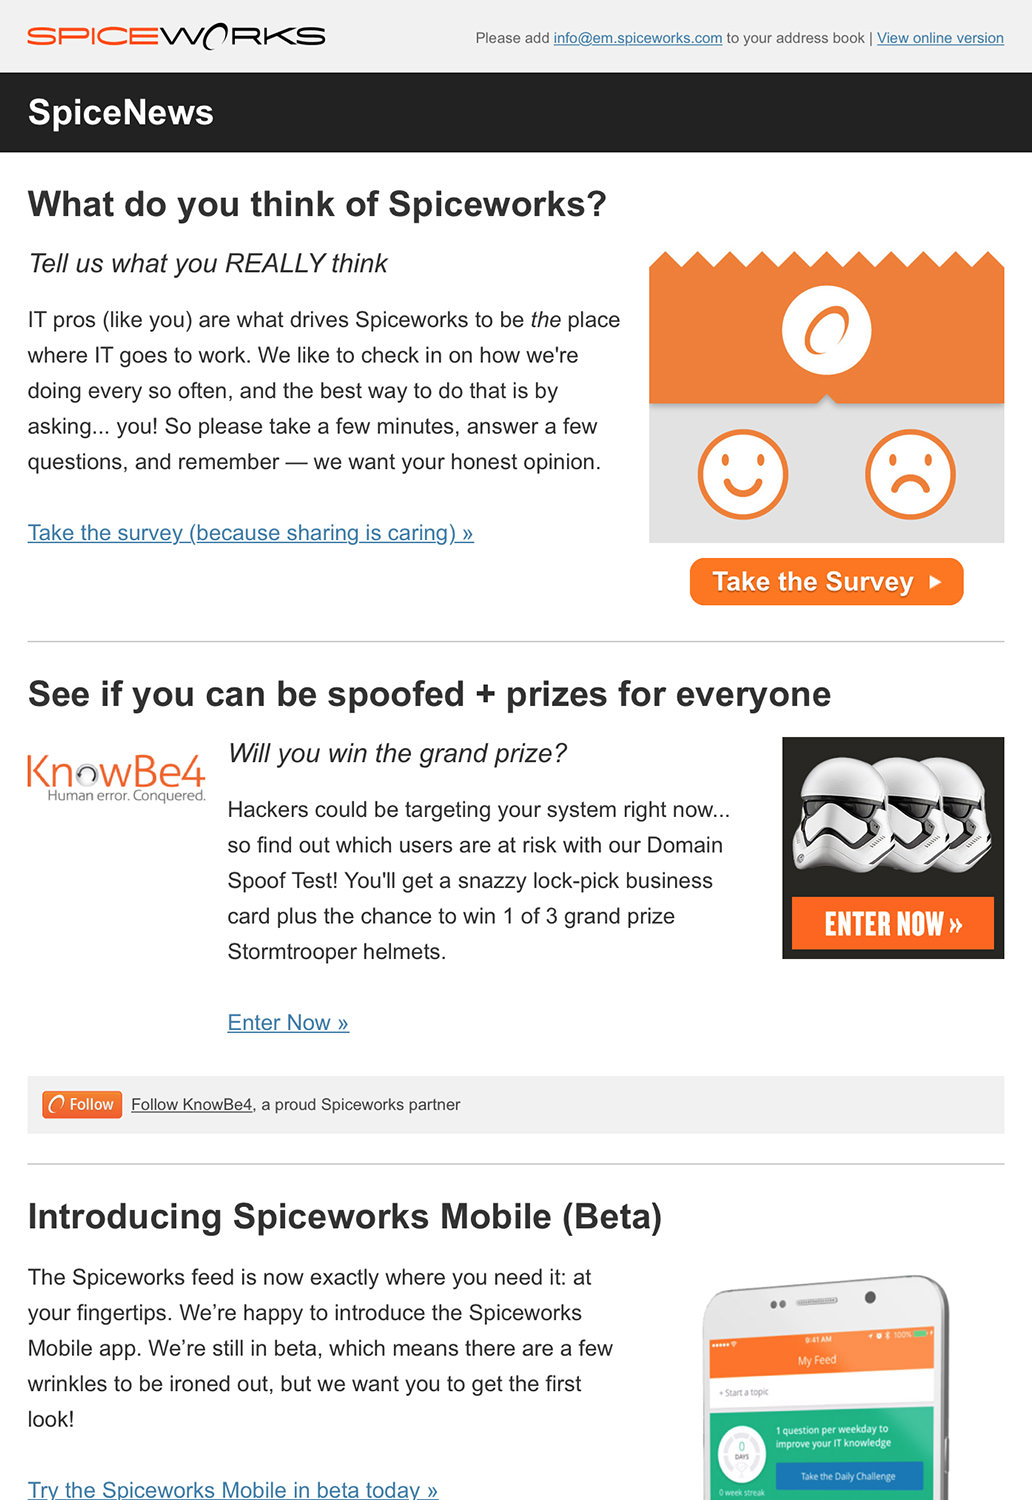 Technology Email Marketing - Spiceworks